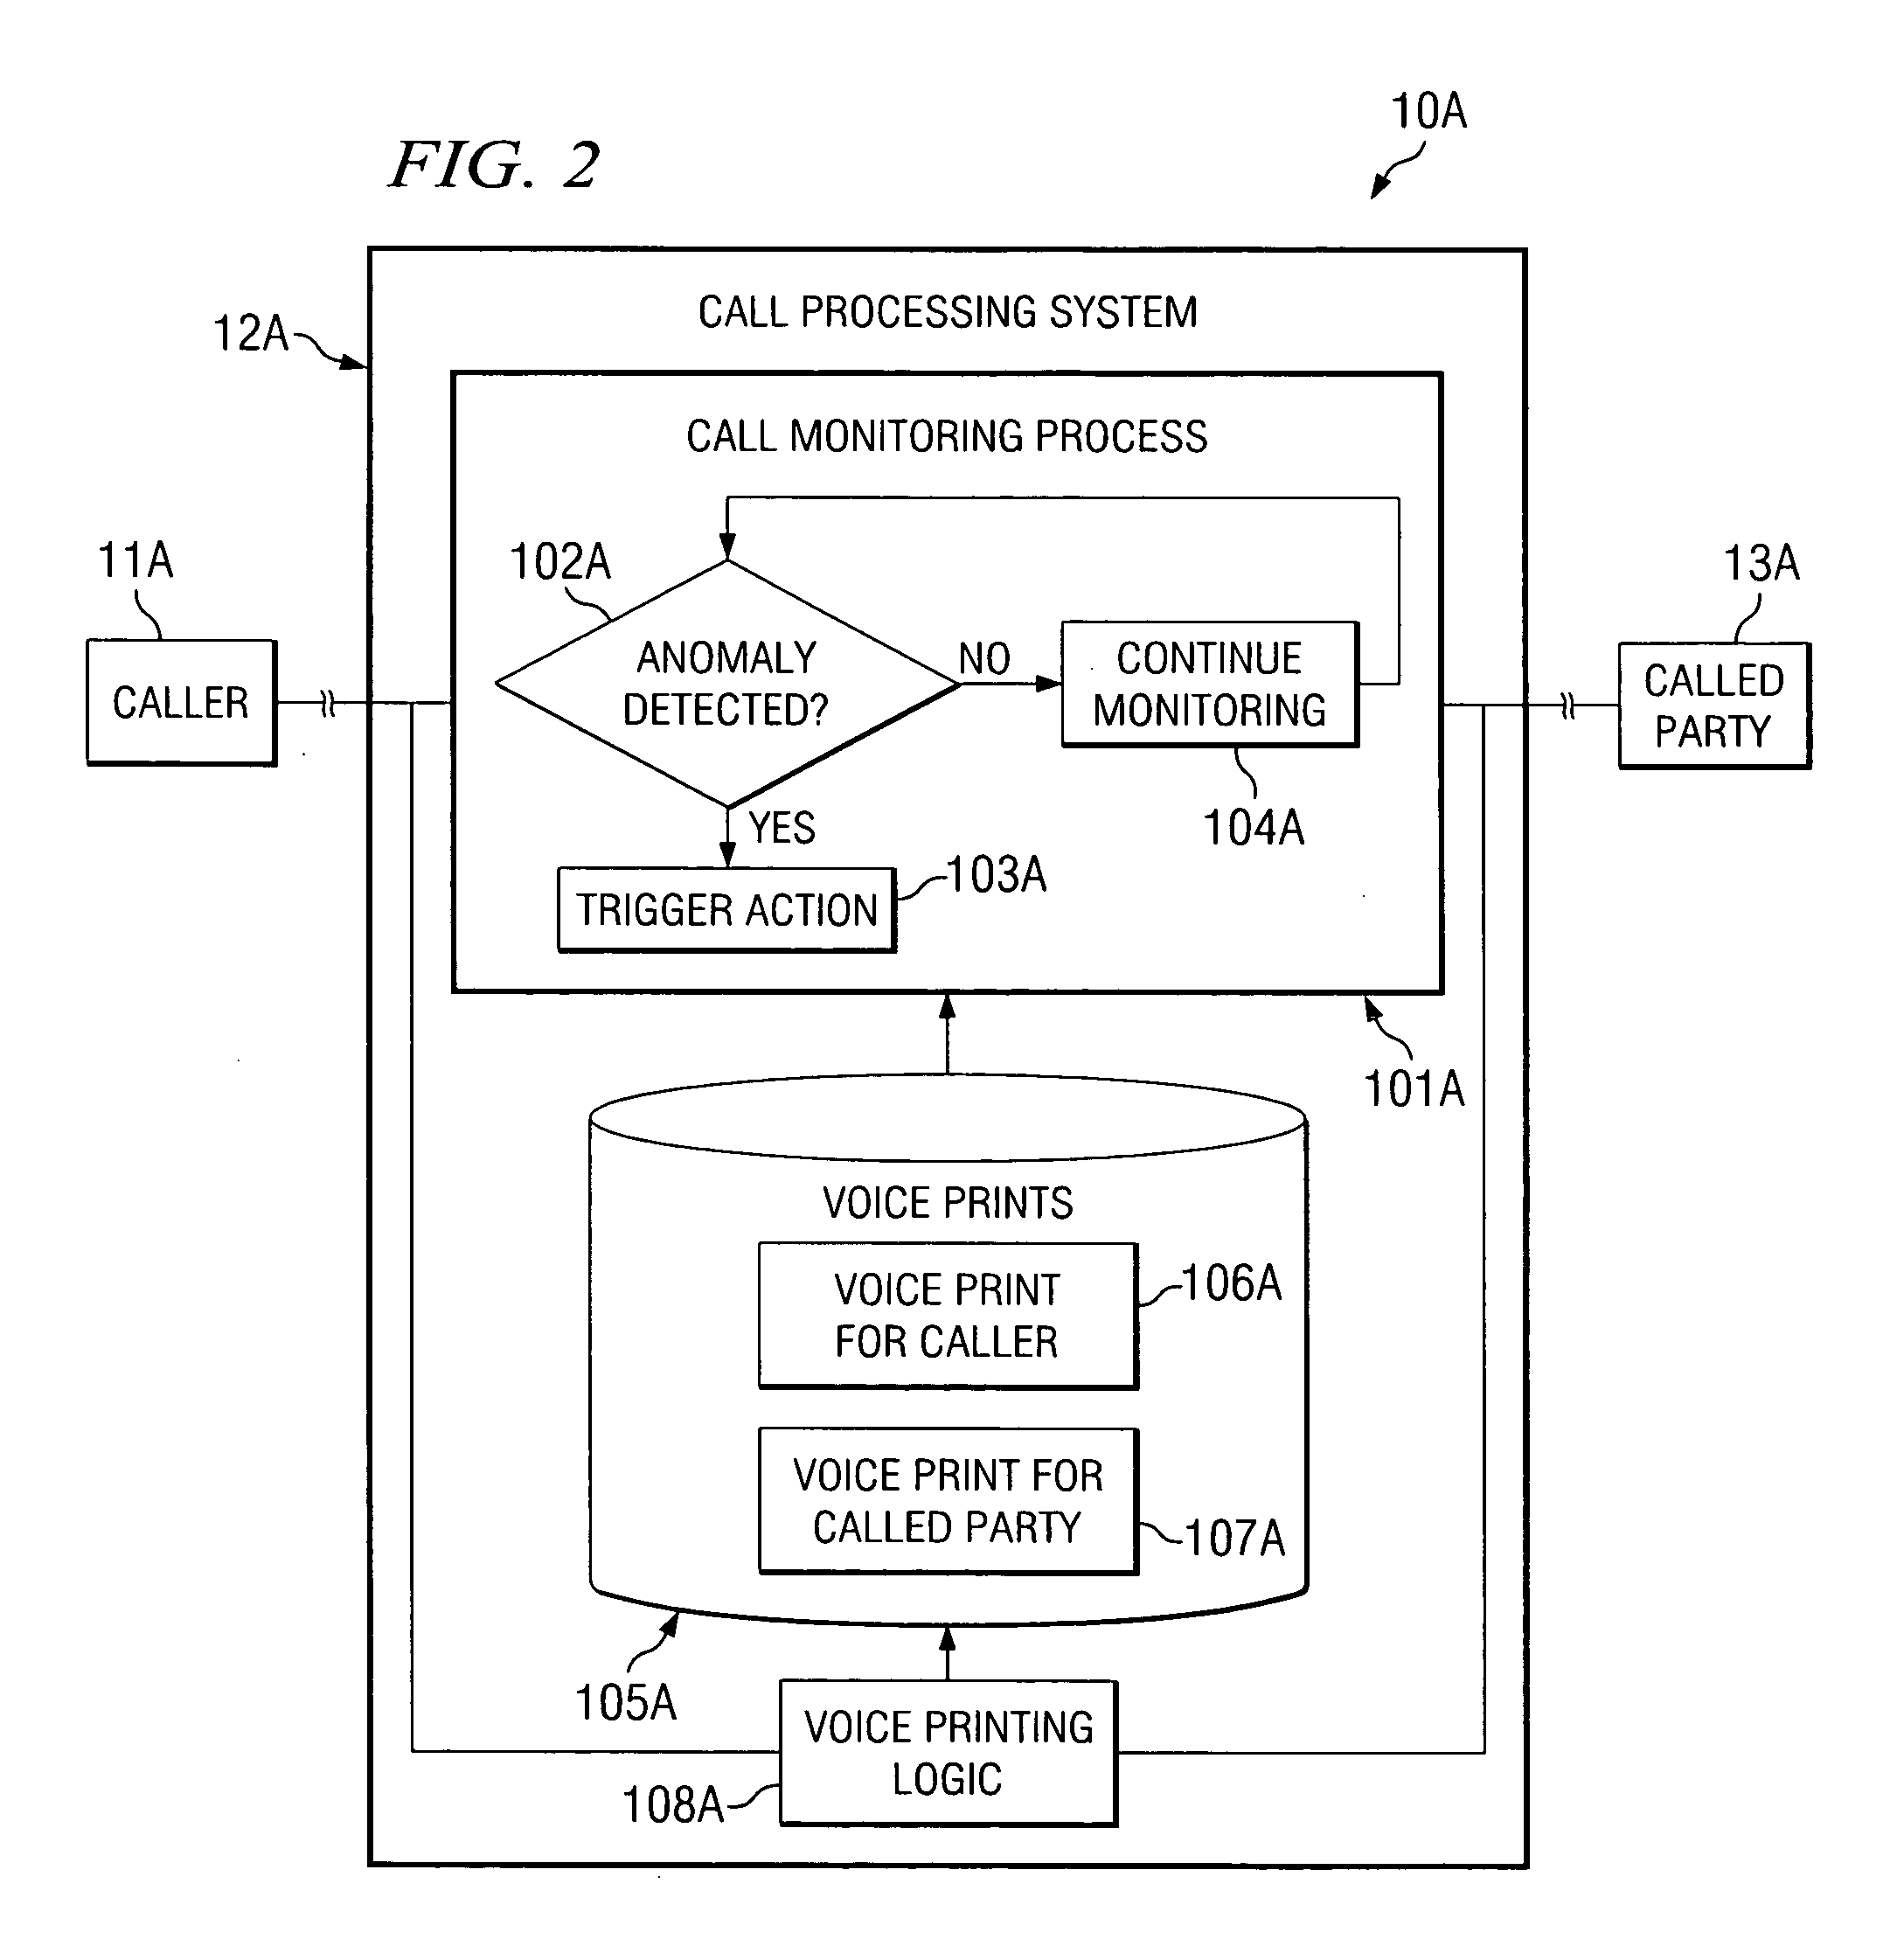 Systems and methods for detecting a call anomaly using biometric identification